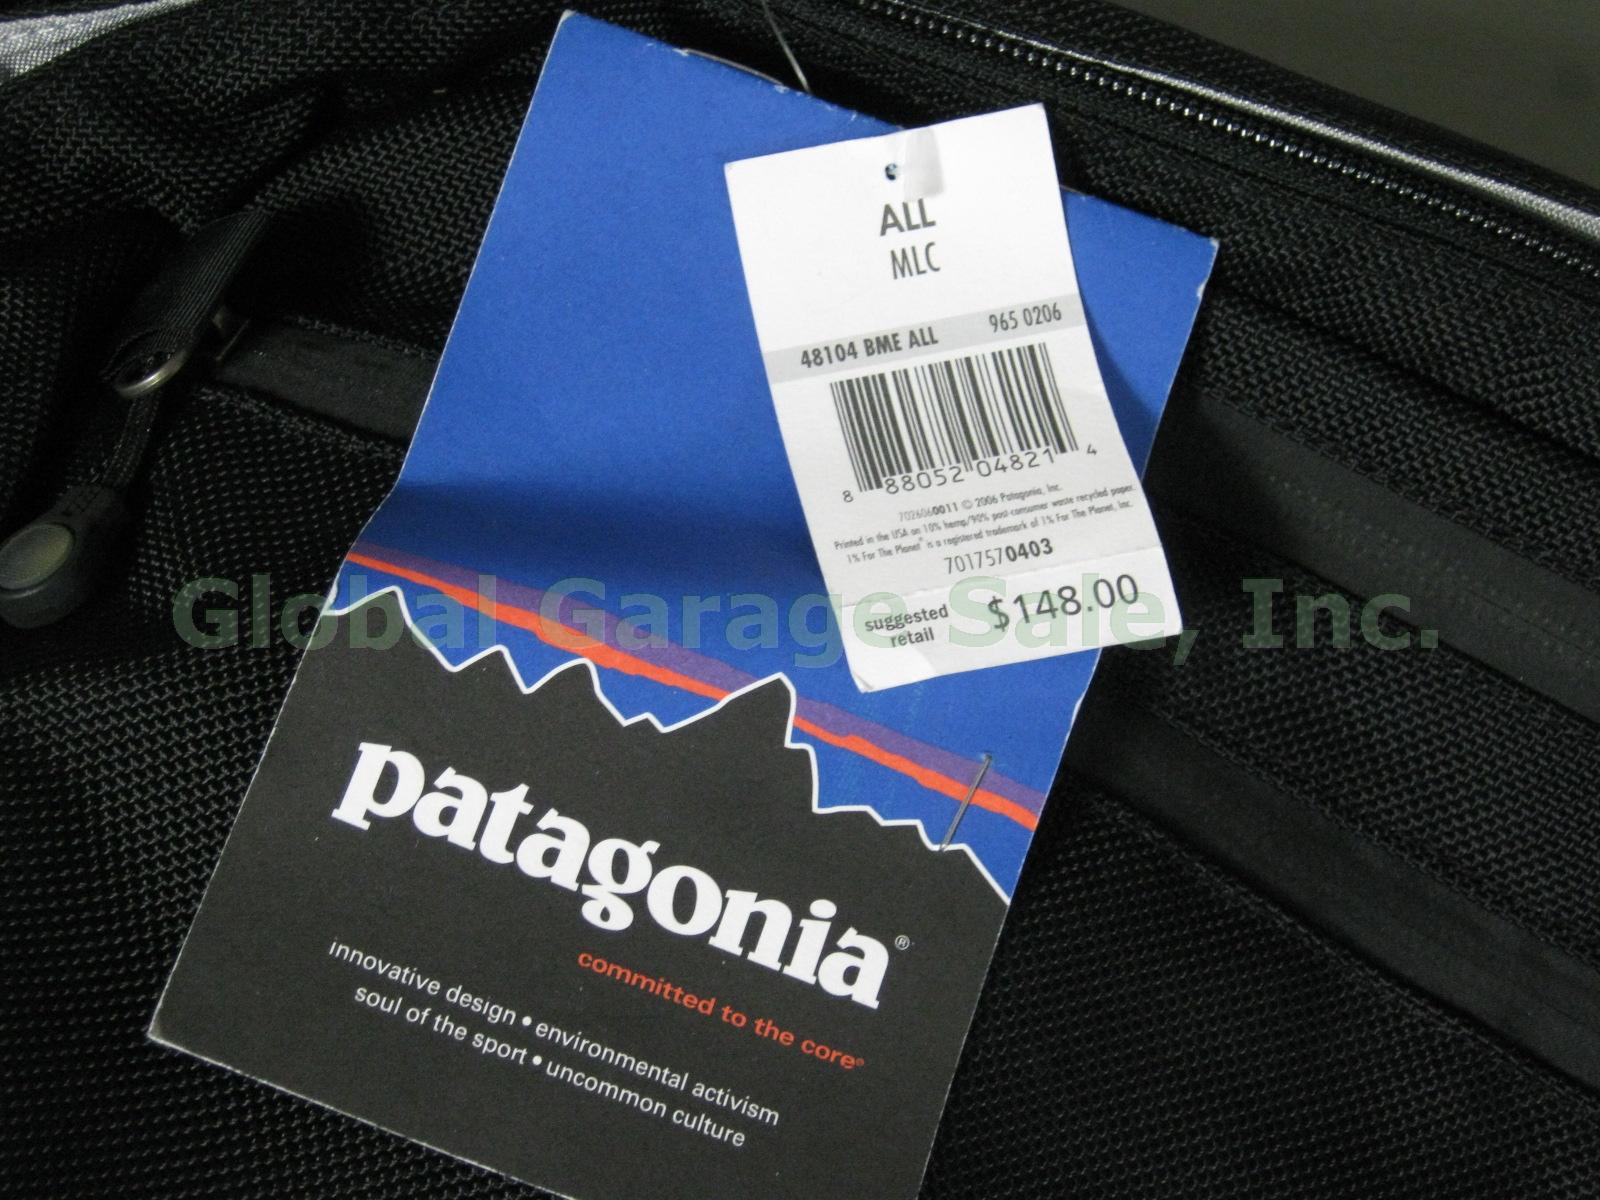 NWT NEW Patagonia MLC Maximum Legal Carry-On Luggage Travel Bag Backpack No Res! 6